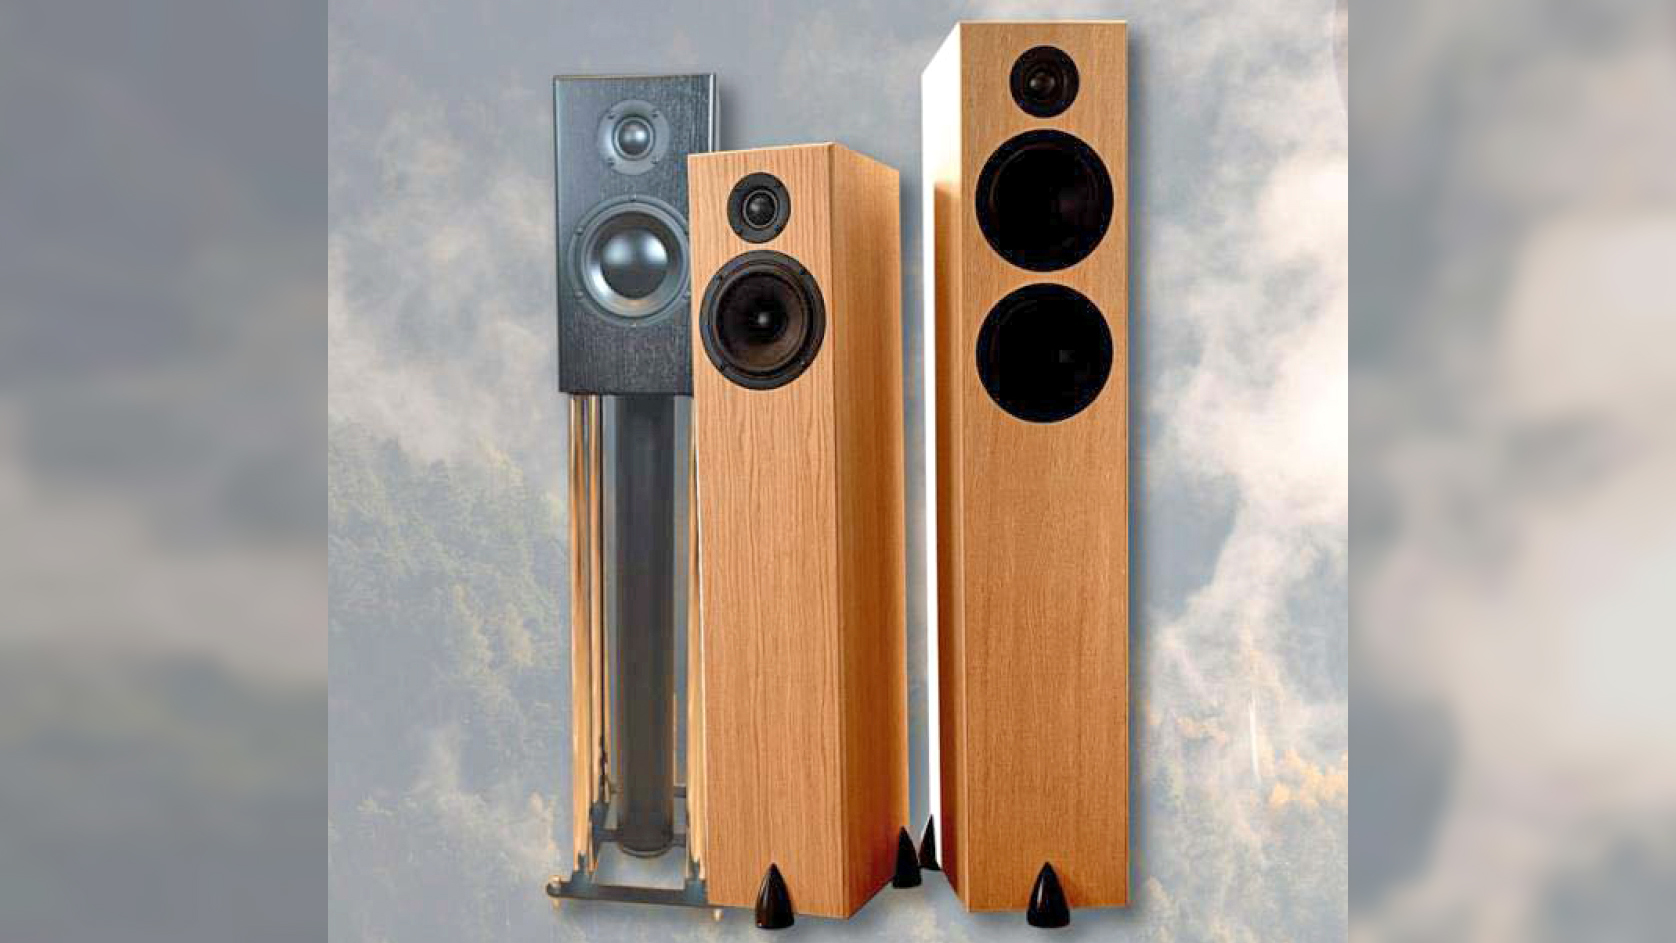 The three new speakers of the "Bison" series from Totem Acoustic (Image Credit: Totem Acoustic)